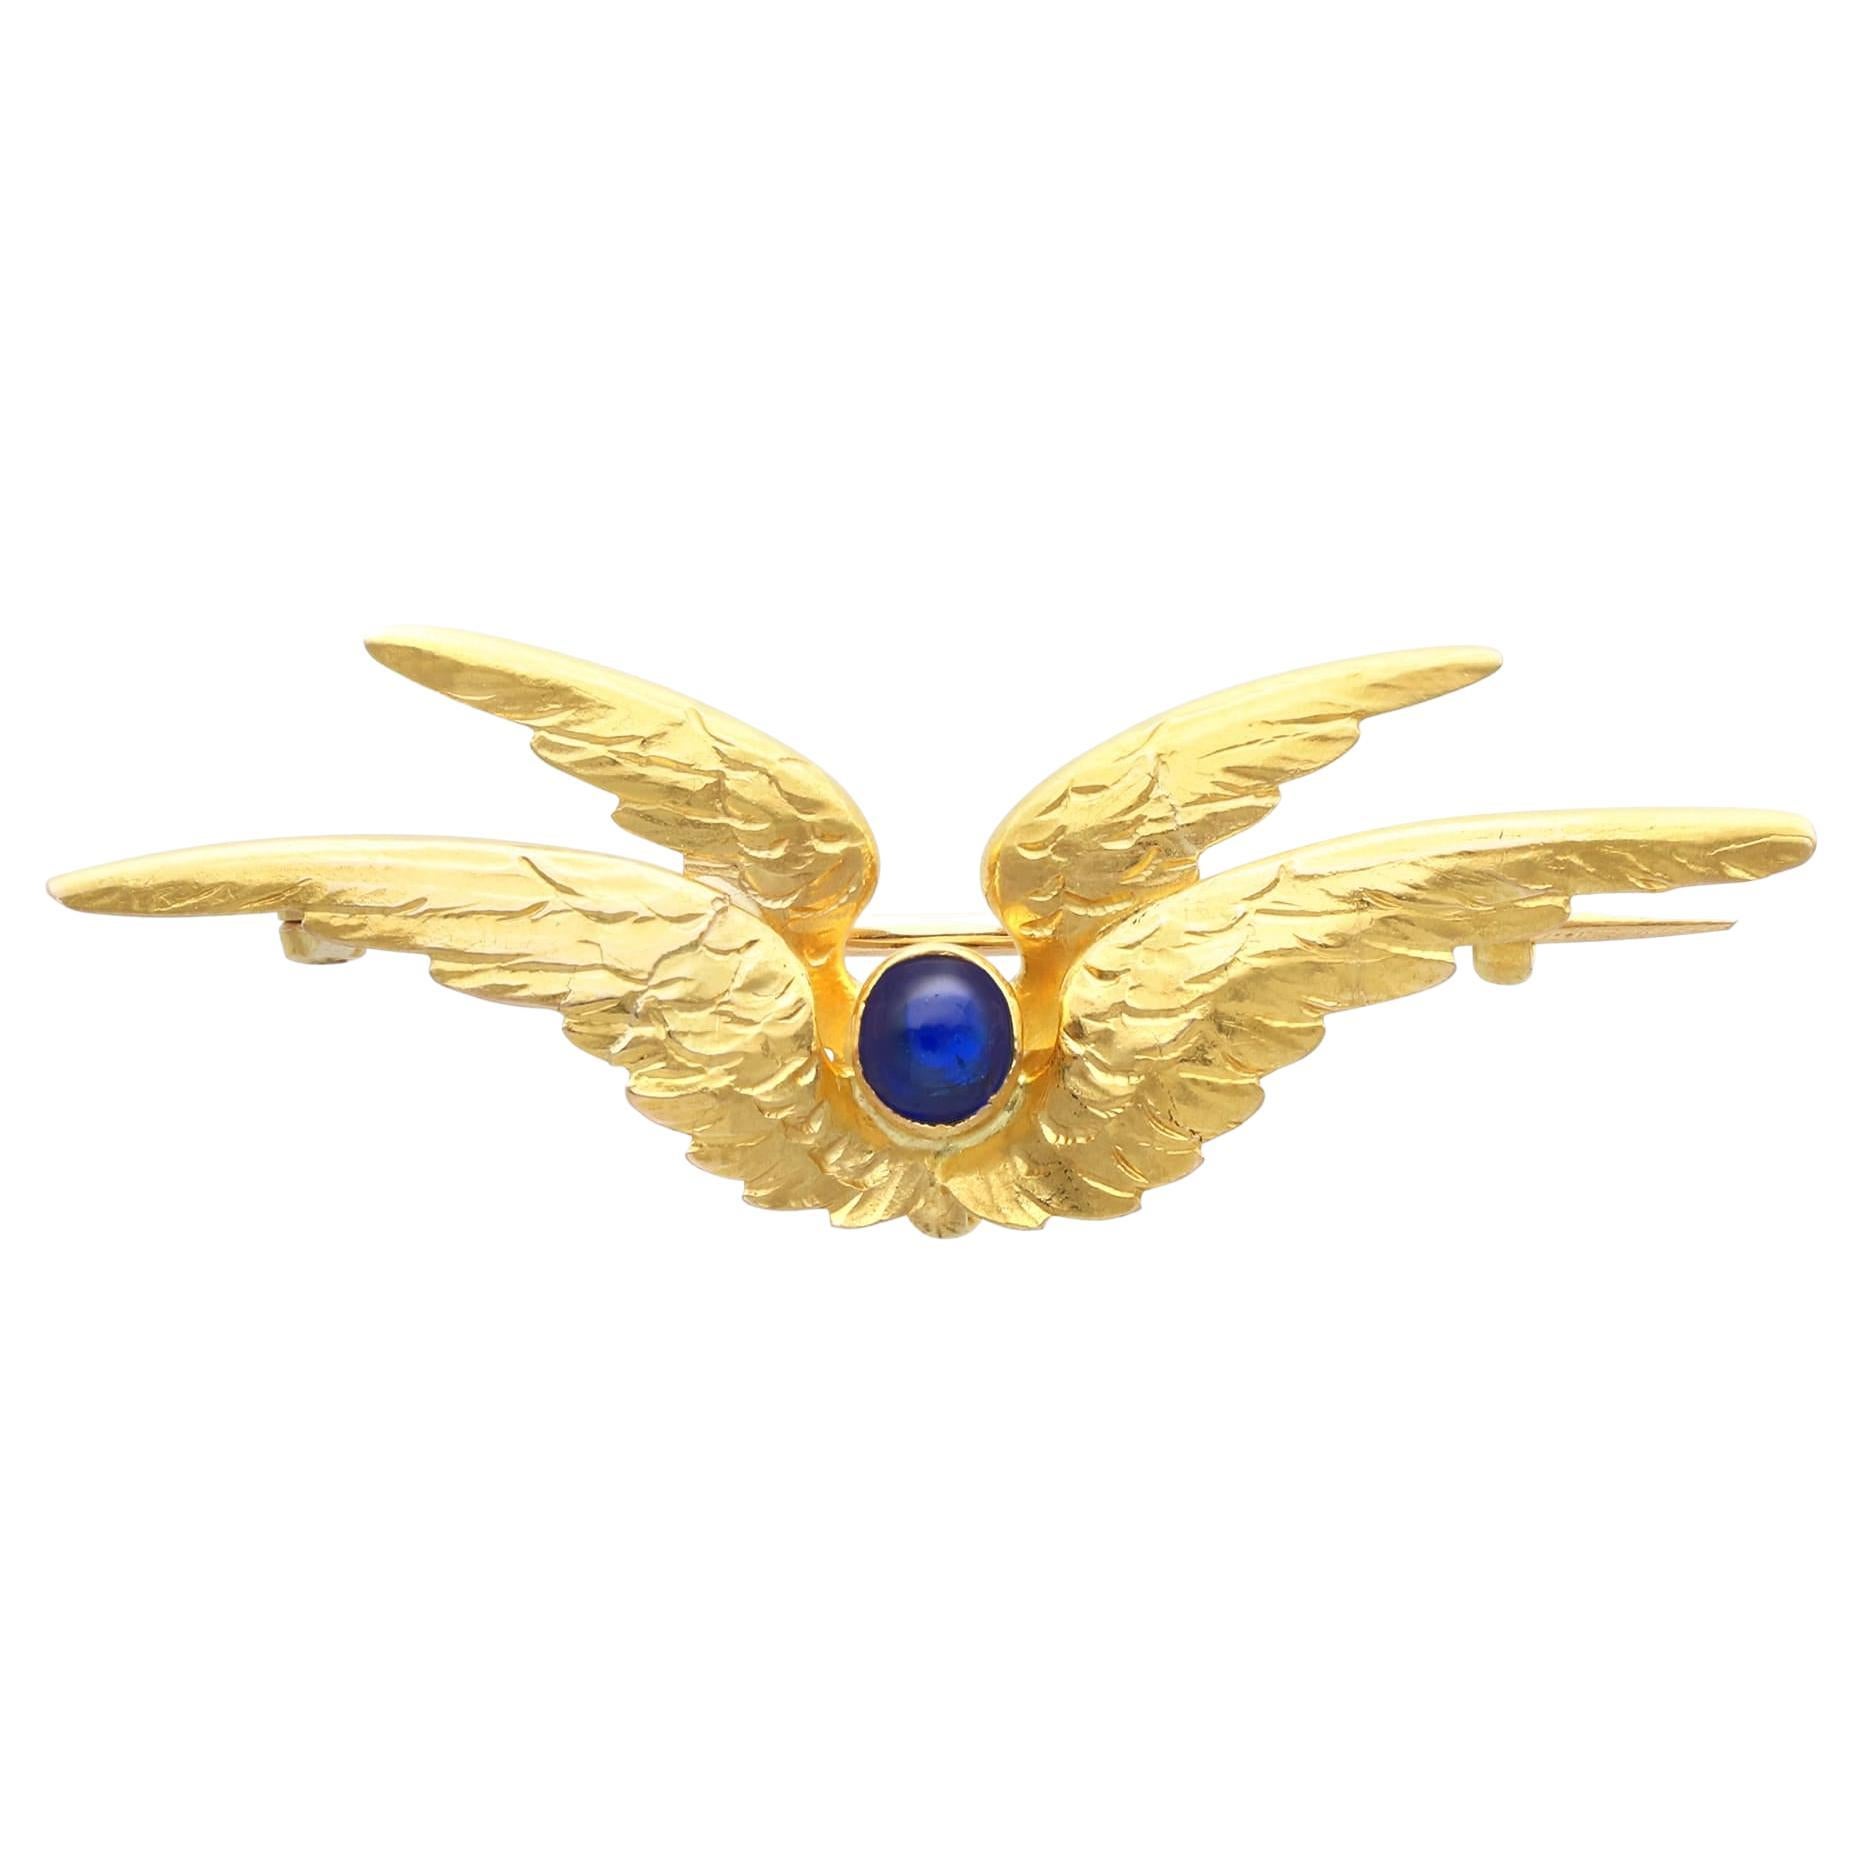 Antique 0.26 Carat Sapphire and 21k Yellow Gold Sweetheart Brooch, circa 1900